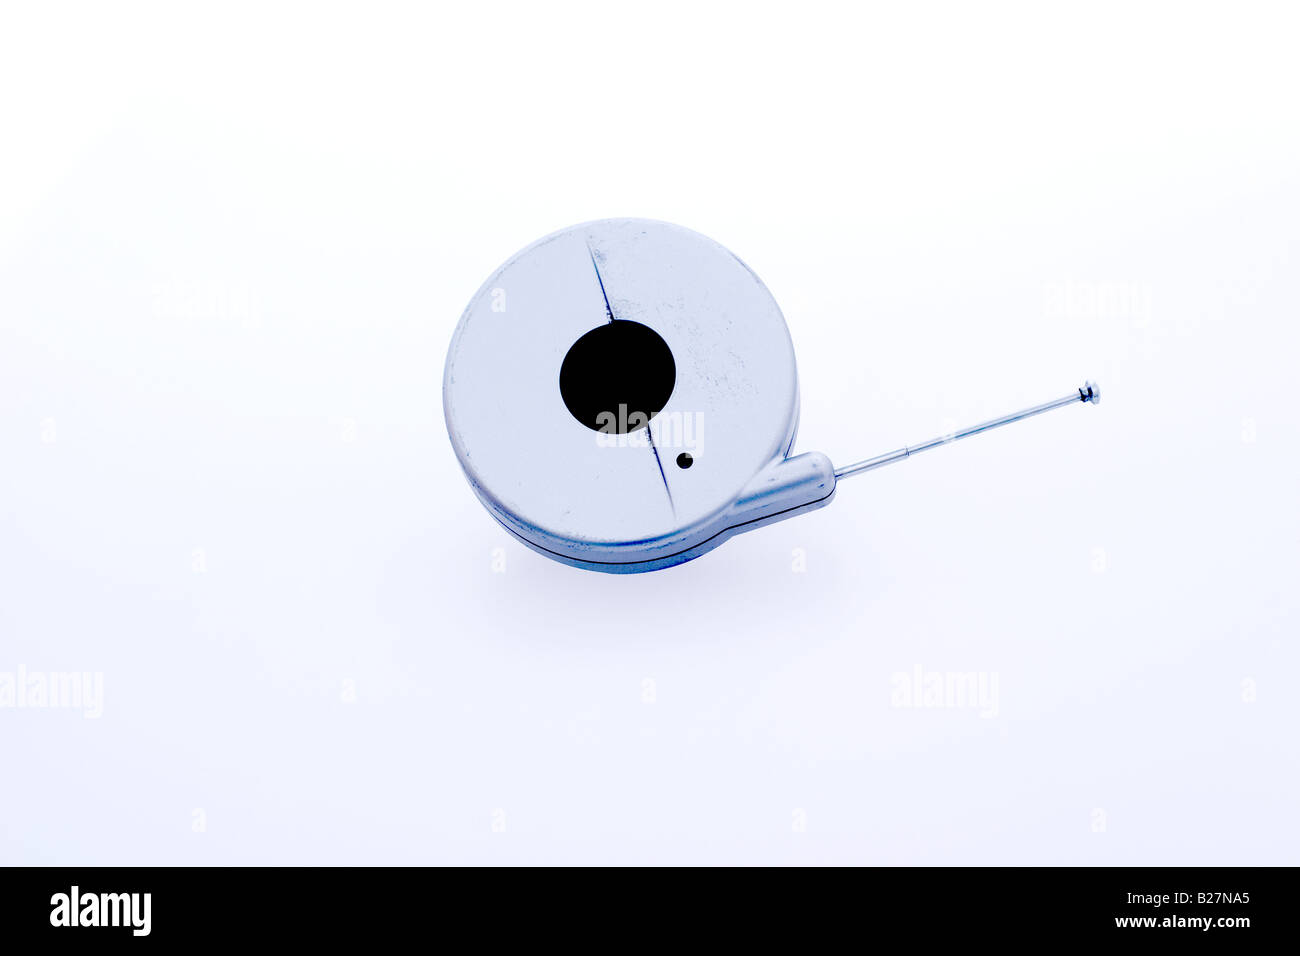 Round metallic object with an antennae with a black circle in the middle Stock Photo